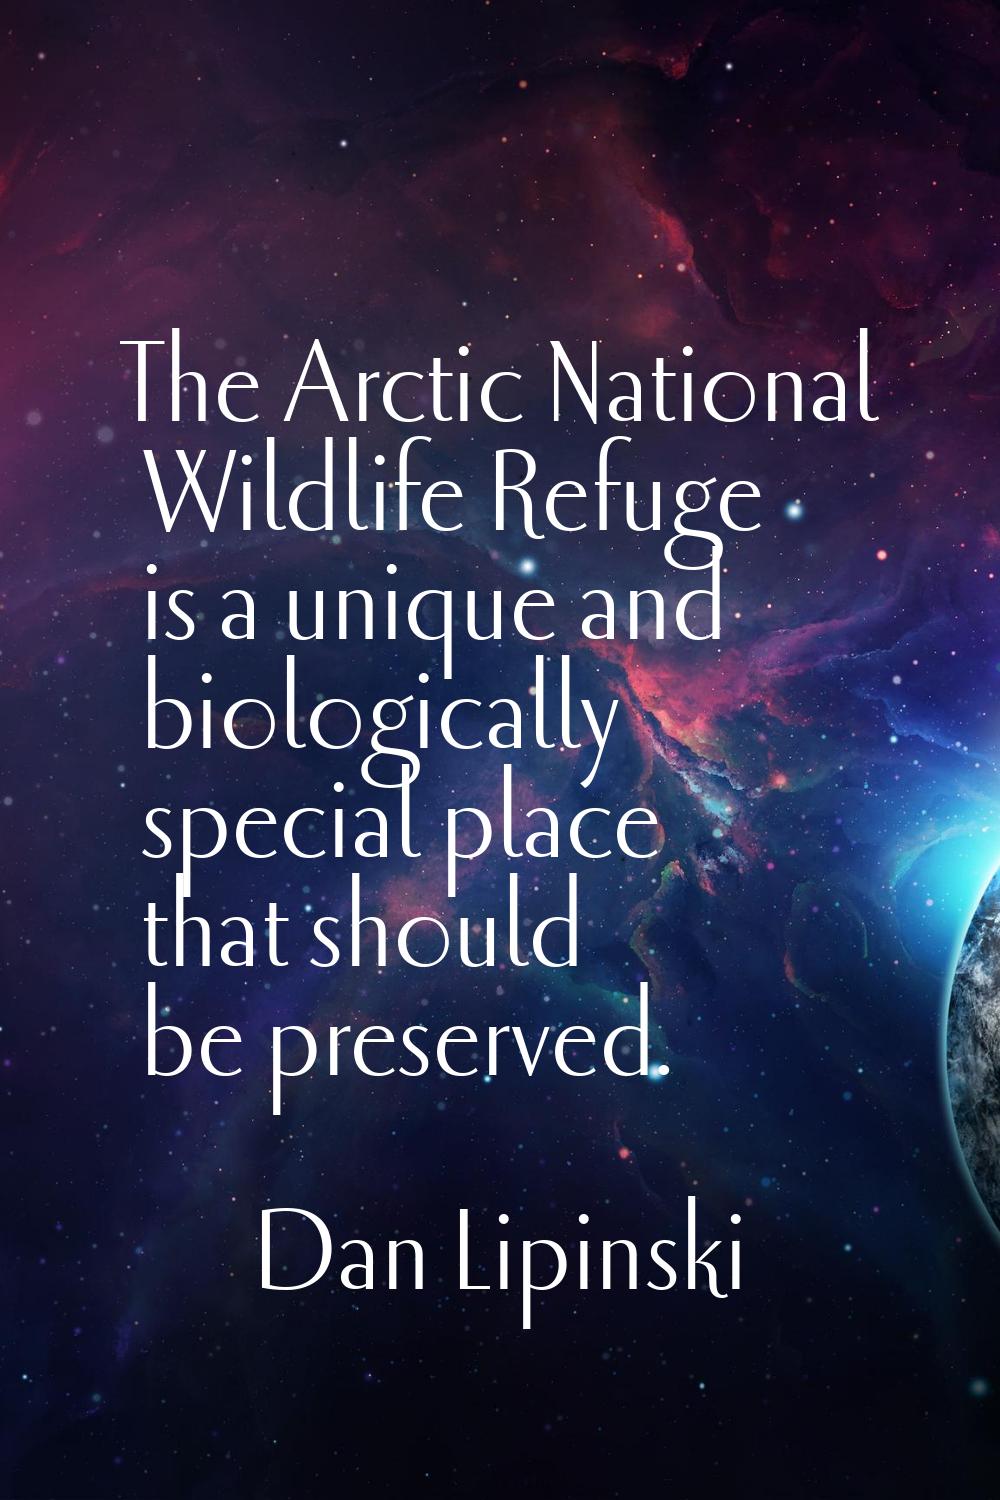 The Arctic National Wildlife Refuge is a unique and biologically special place that should be prese